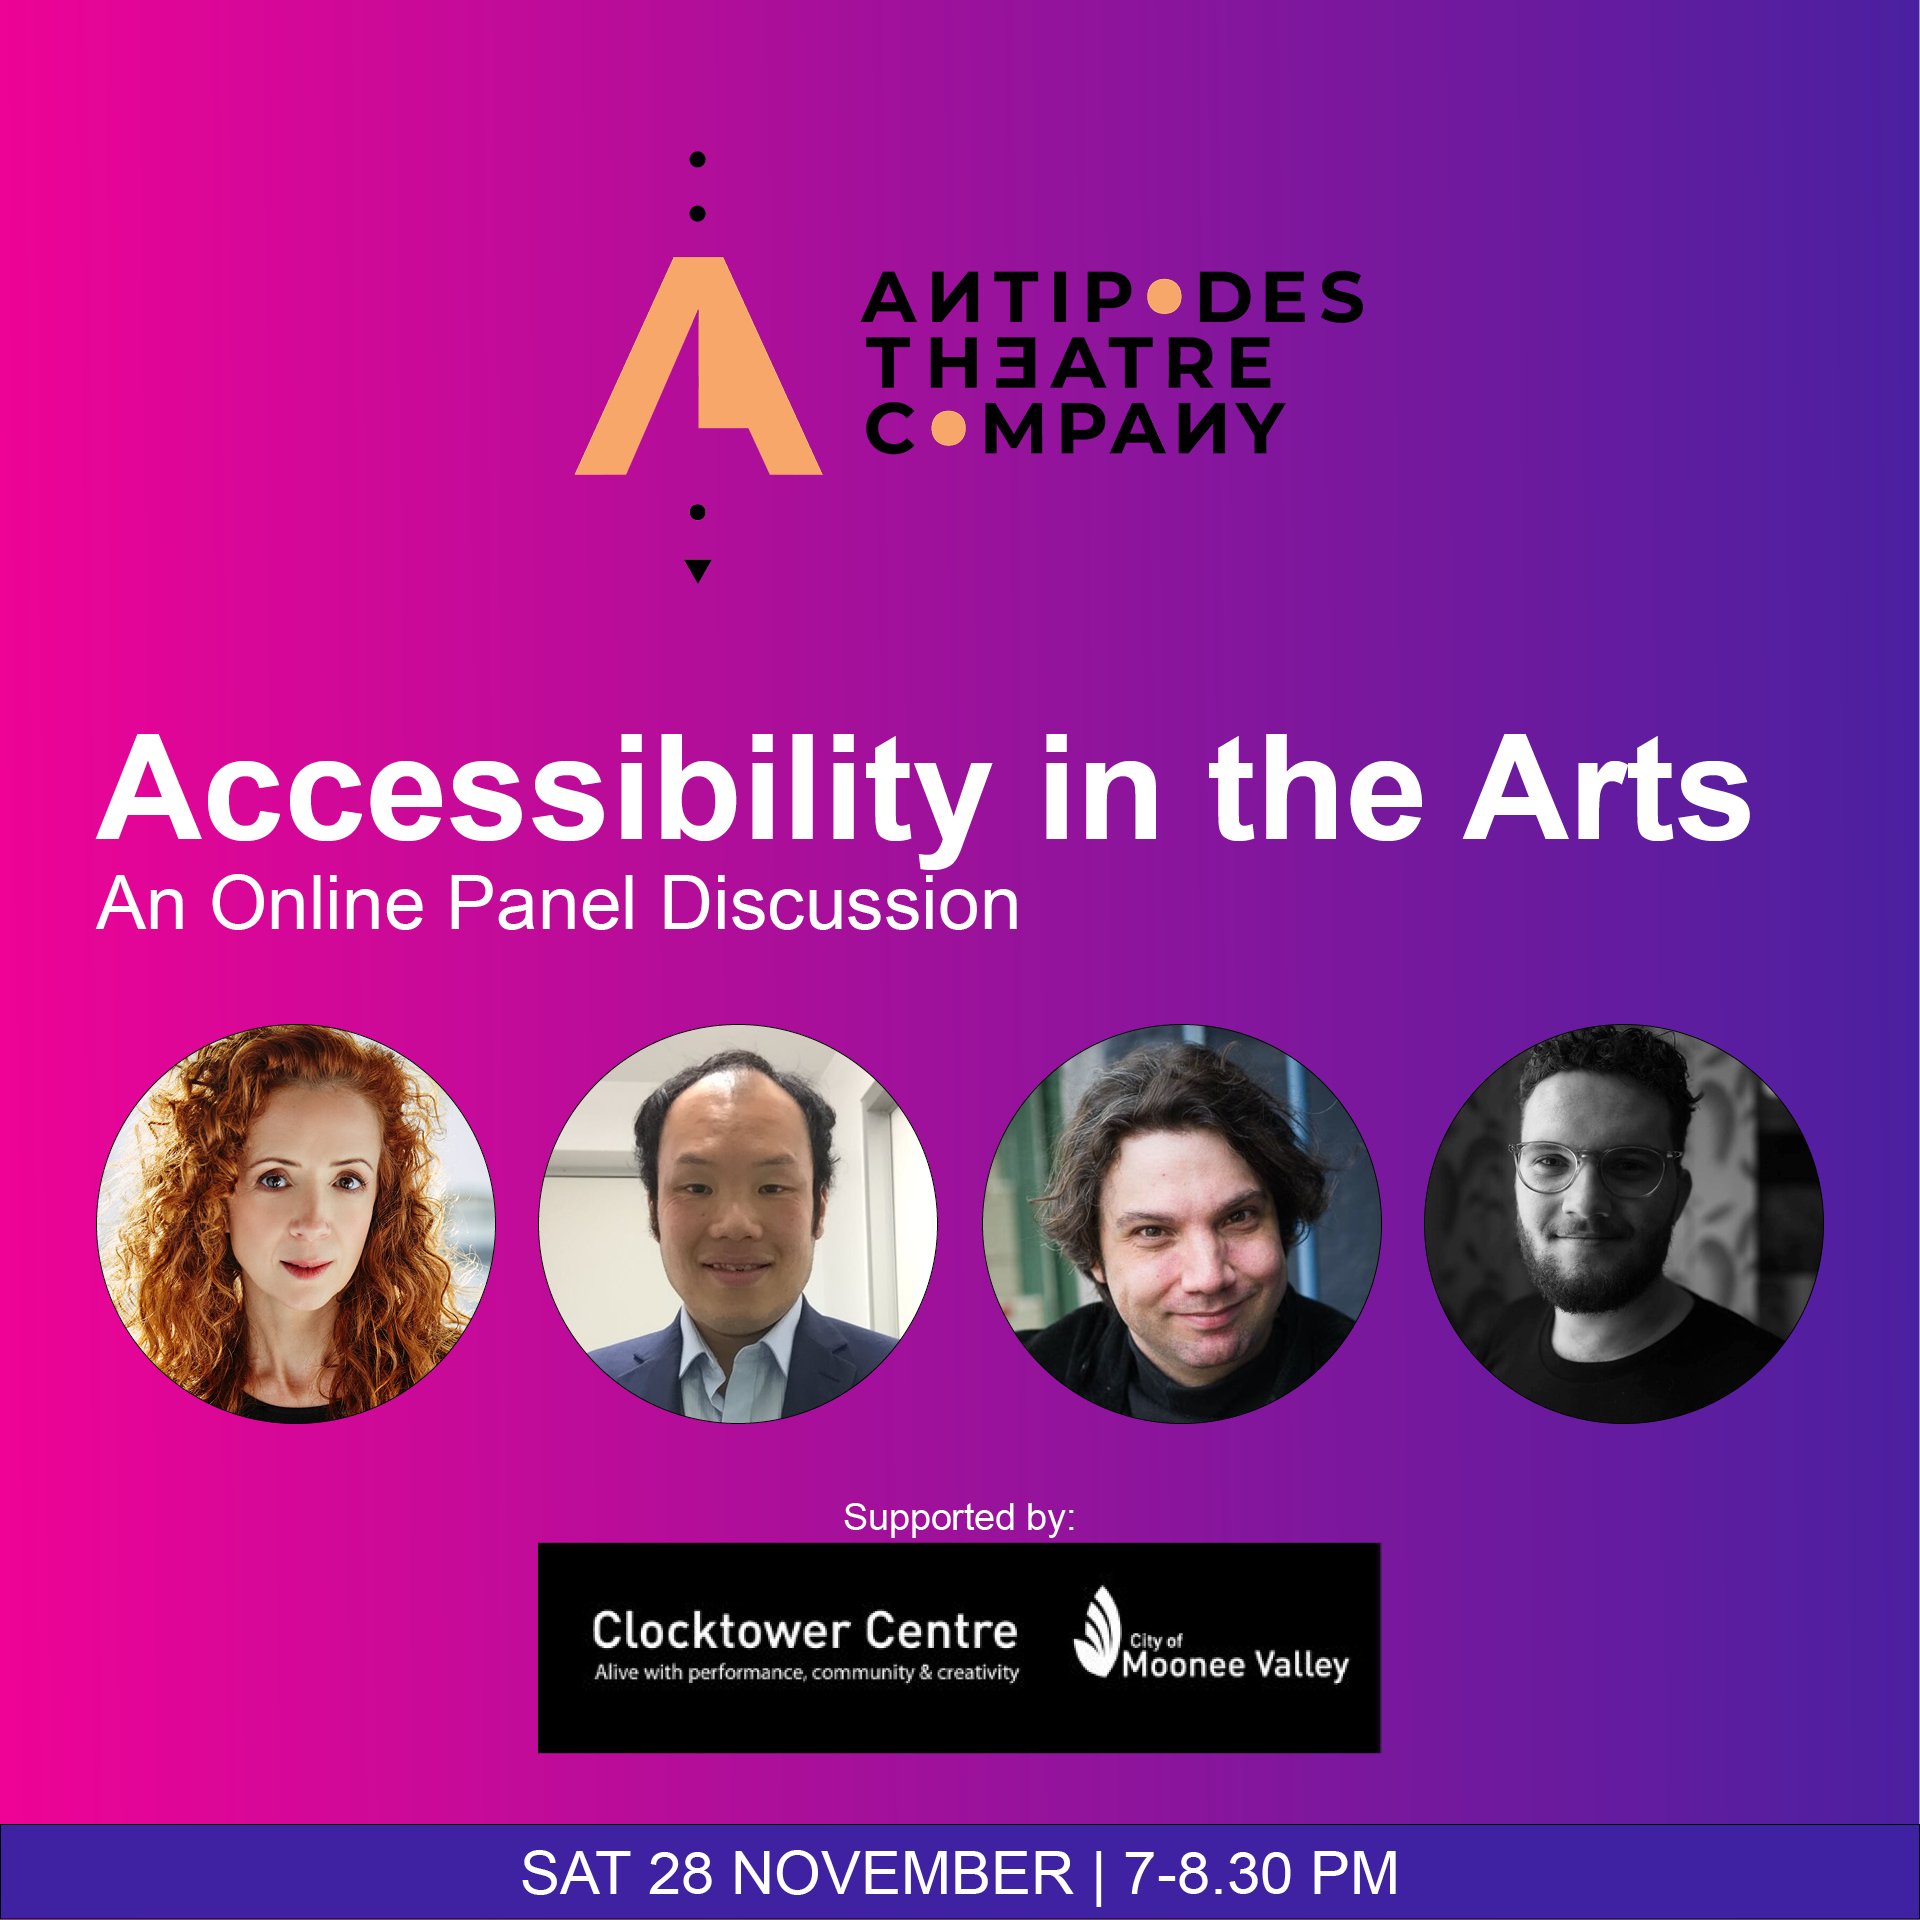 ACCESSIBILITY IN THE ARTS (2020)